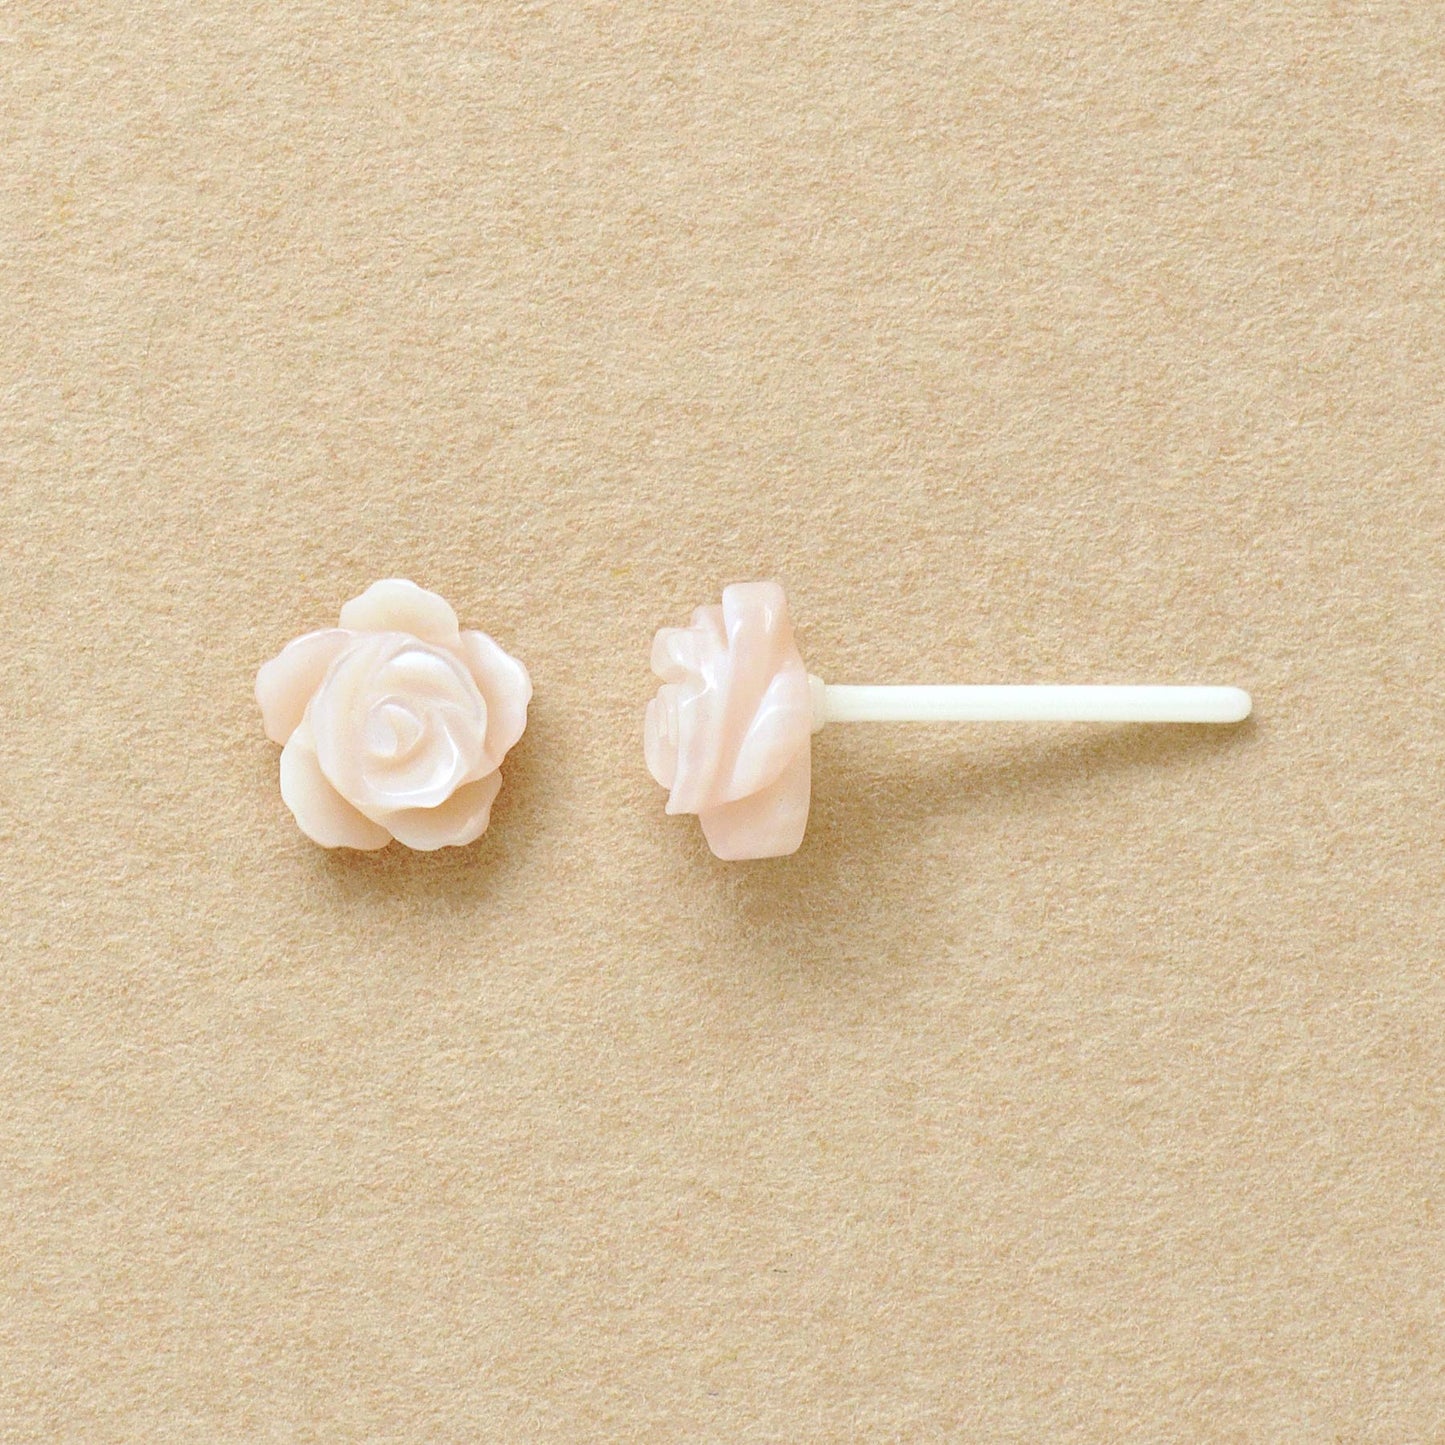 Carved Pink Shell Ceramic Post Earrings - Product Image